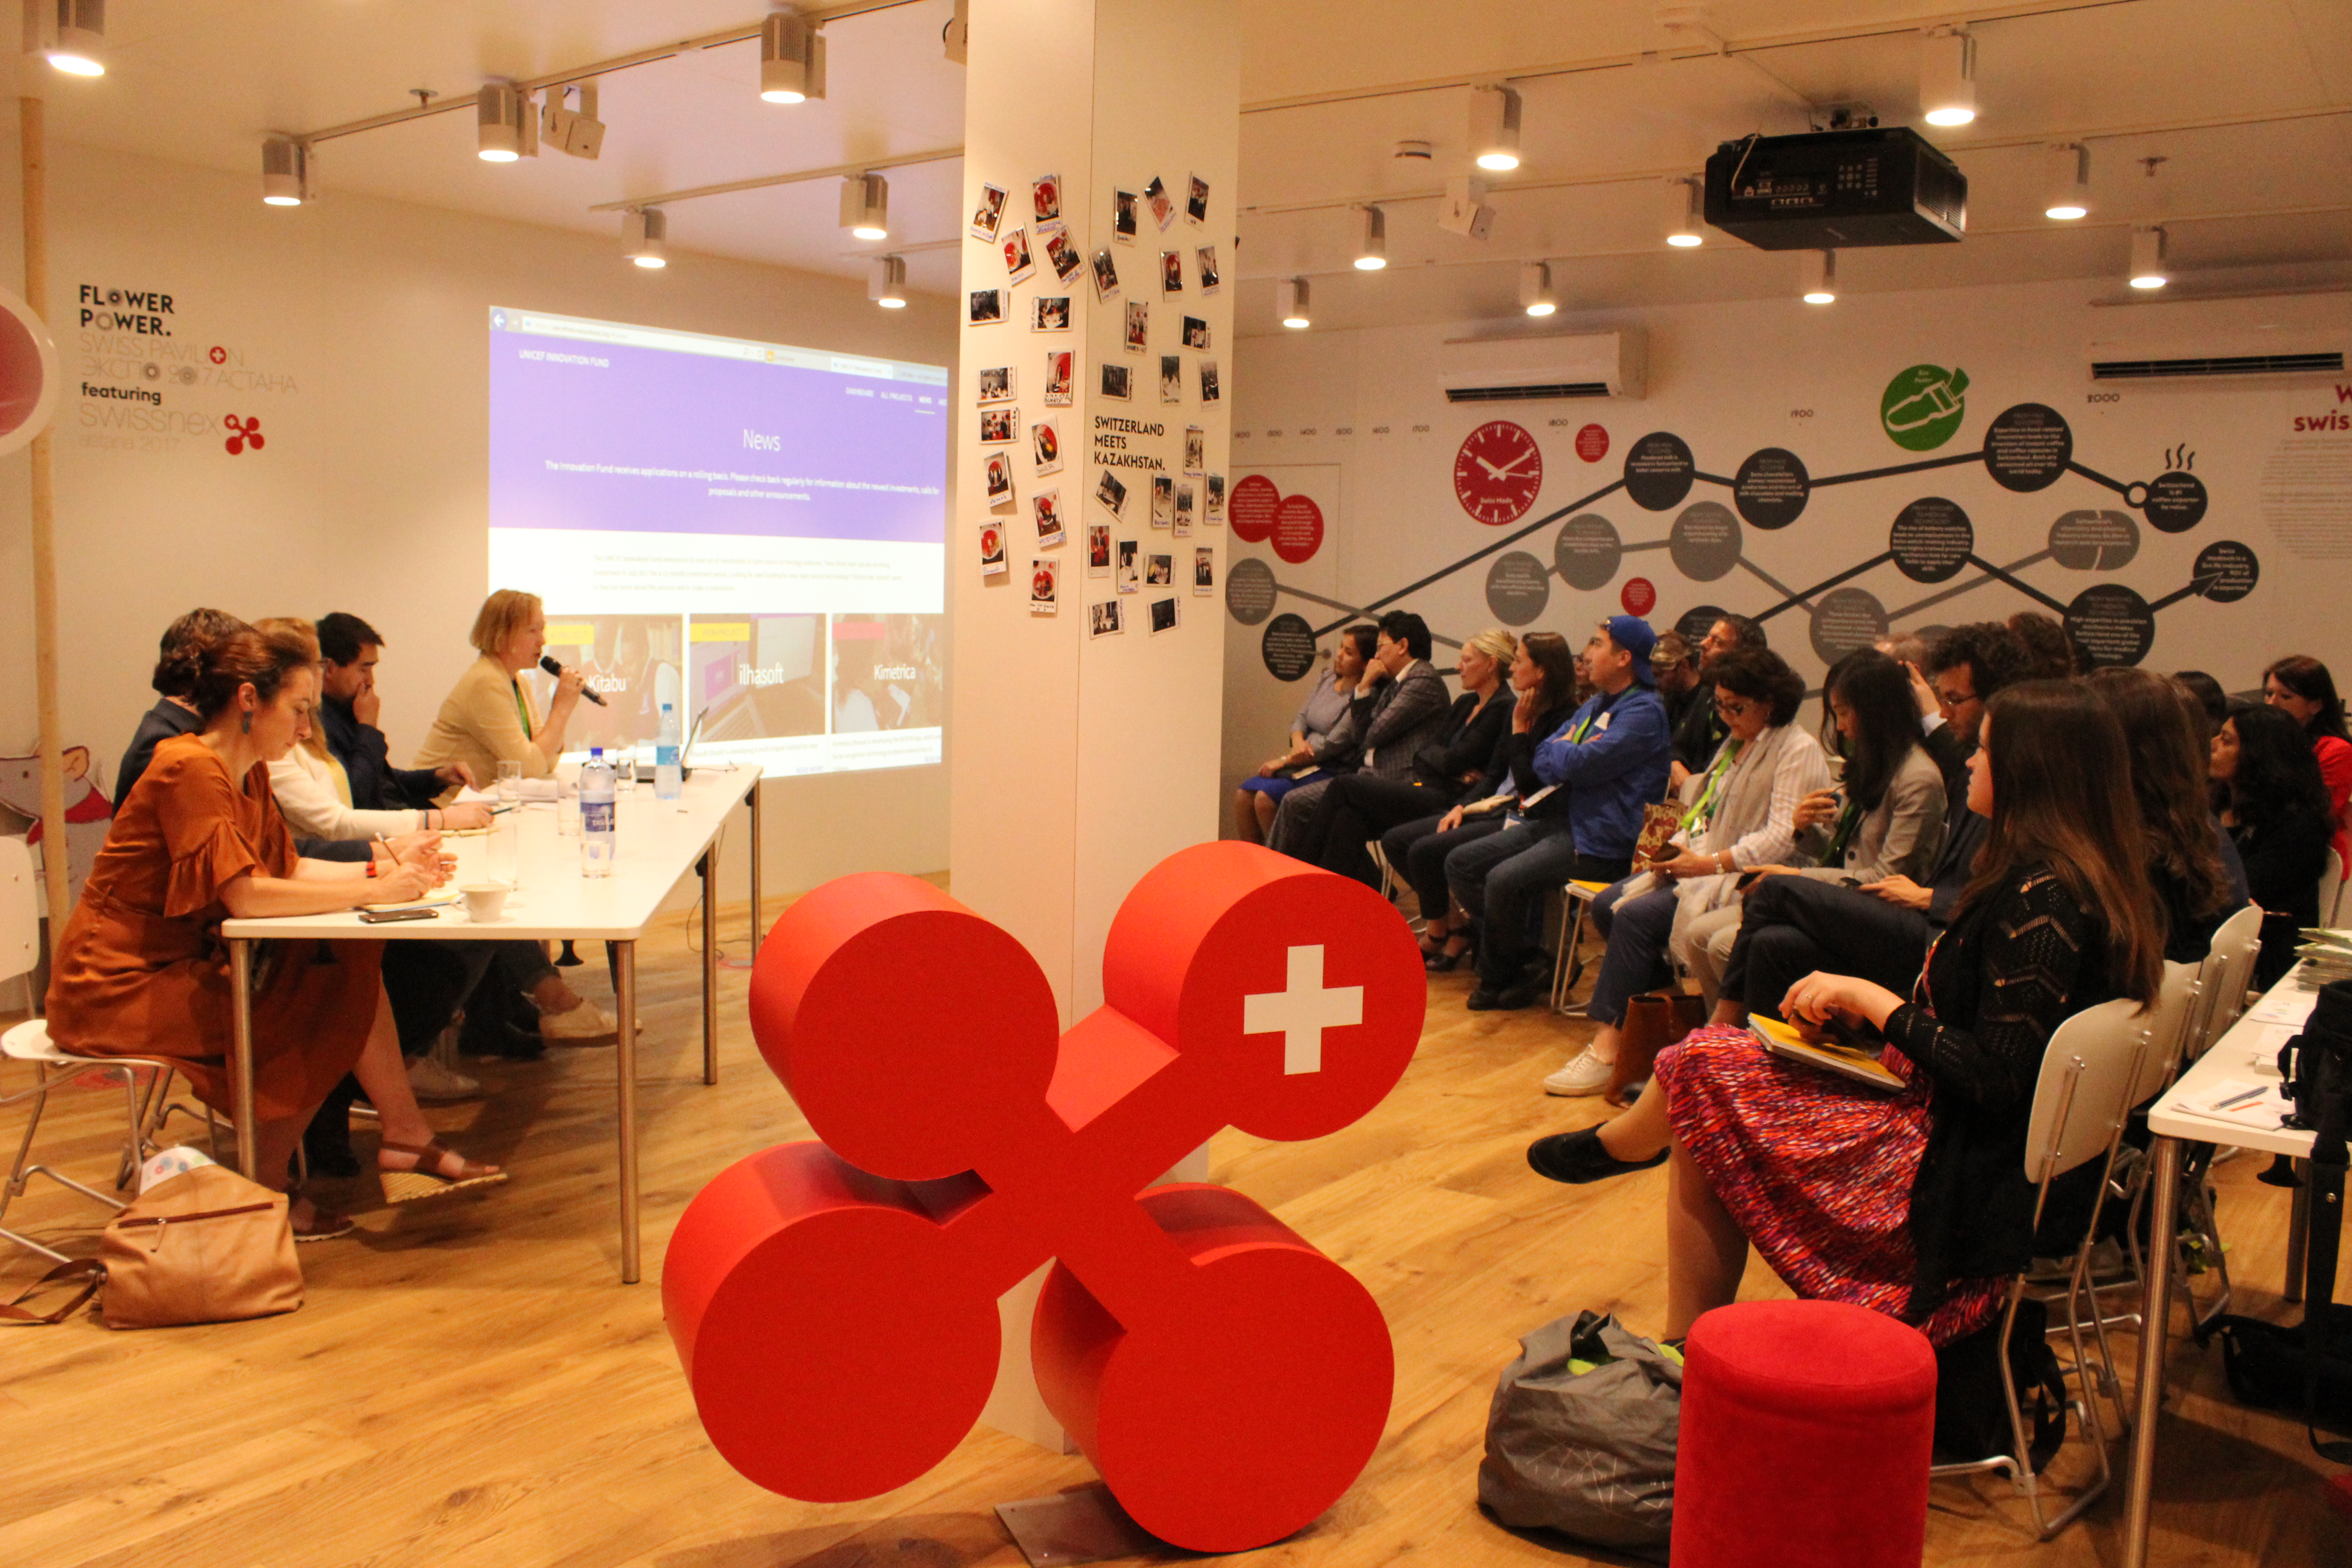 Conference at the swissnex Lab